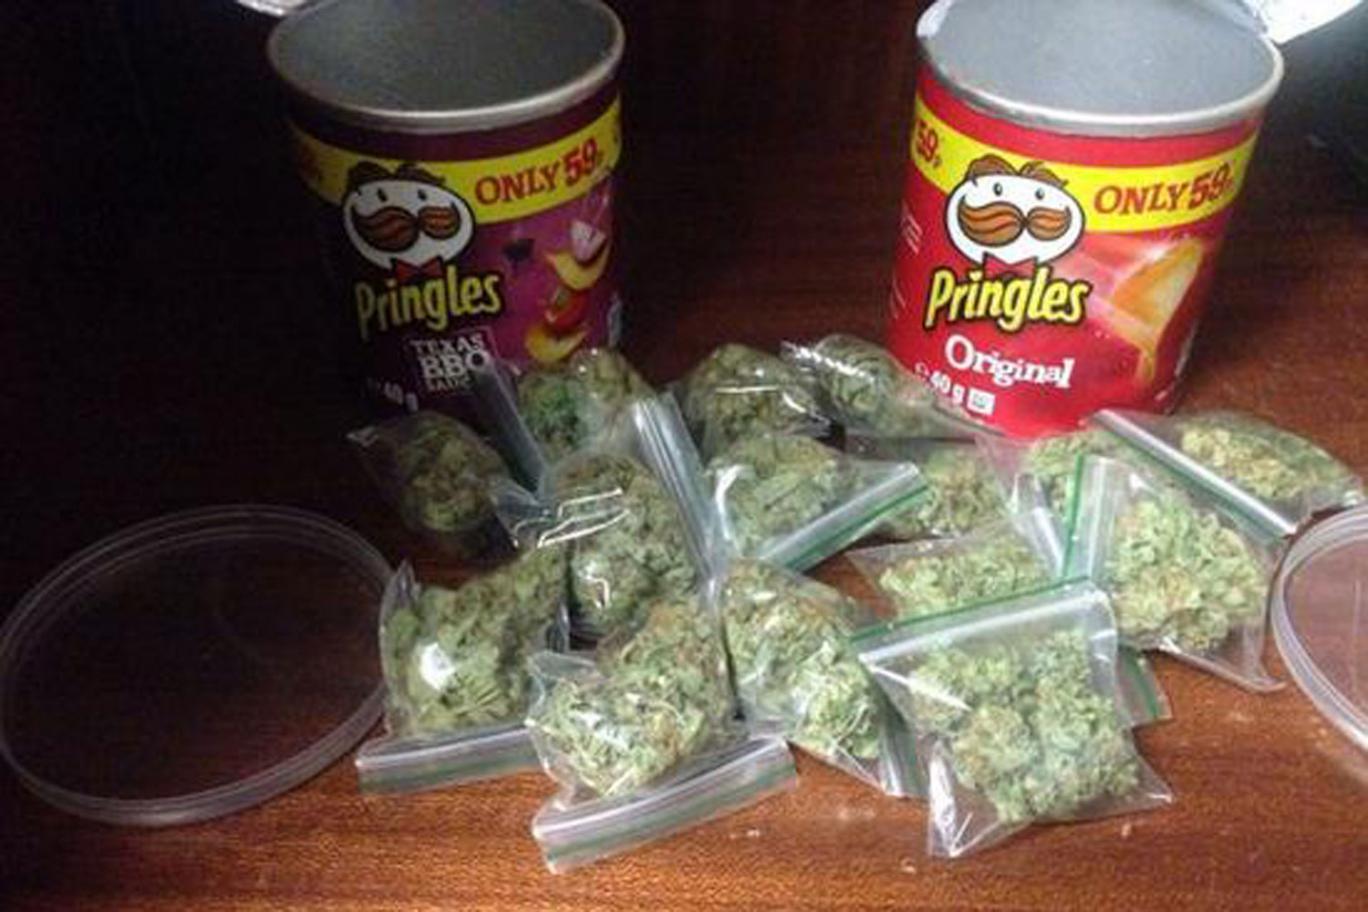 15 Bags Of Weed Found Stuffed Inside Pringles Cans On A Playground